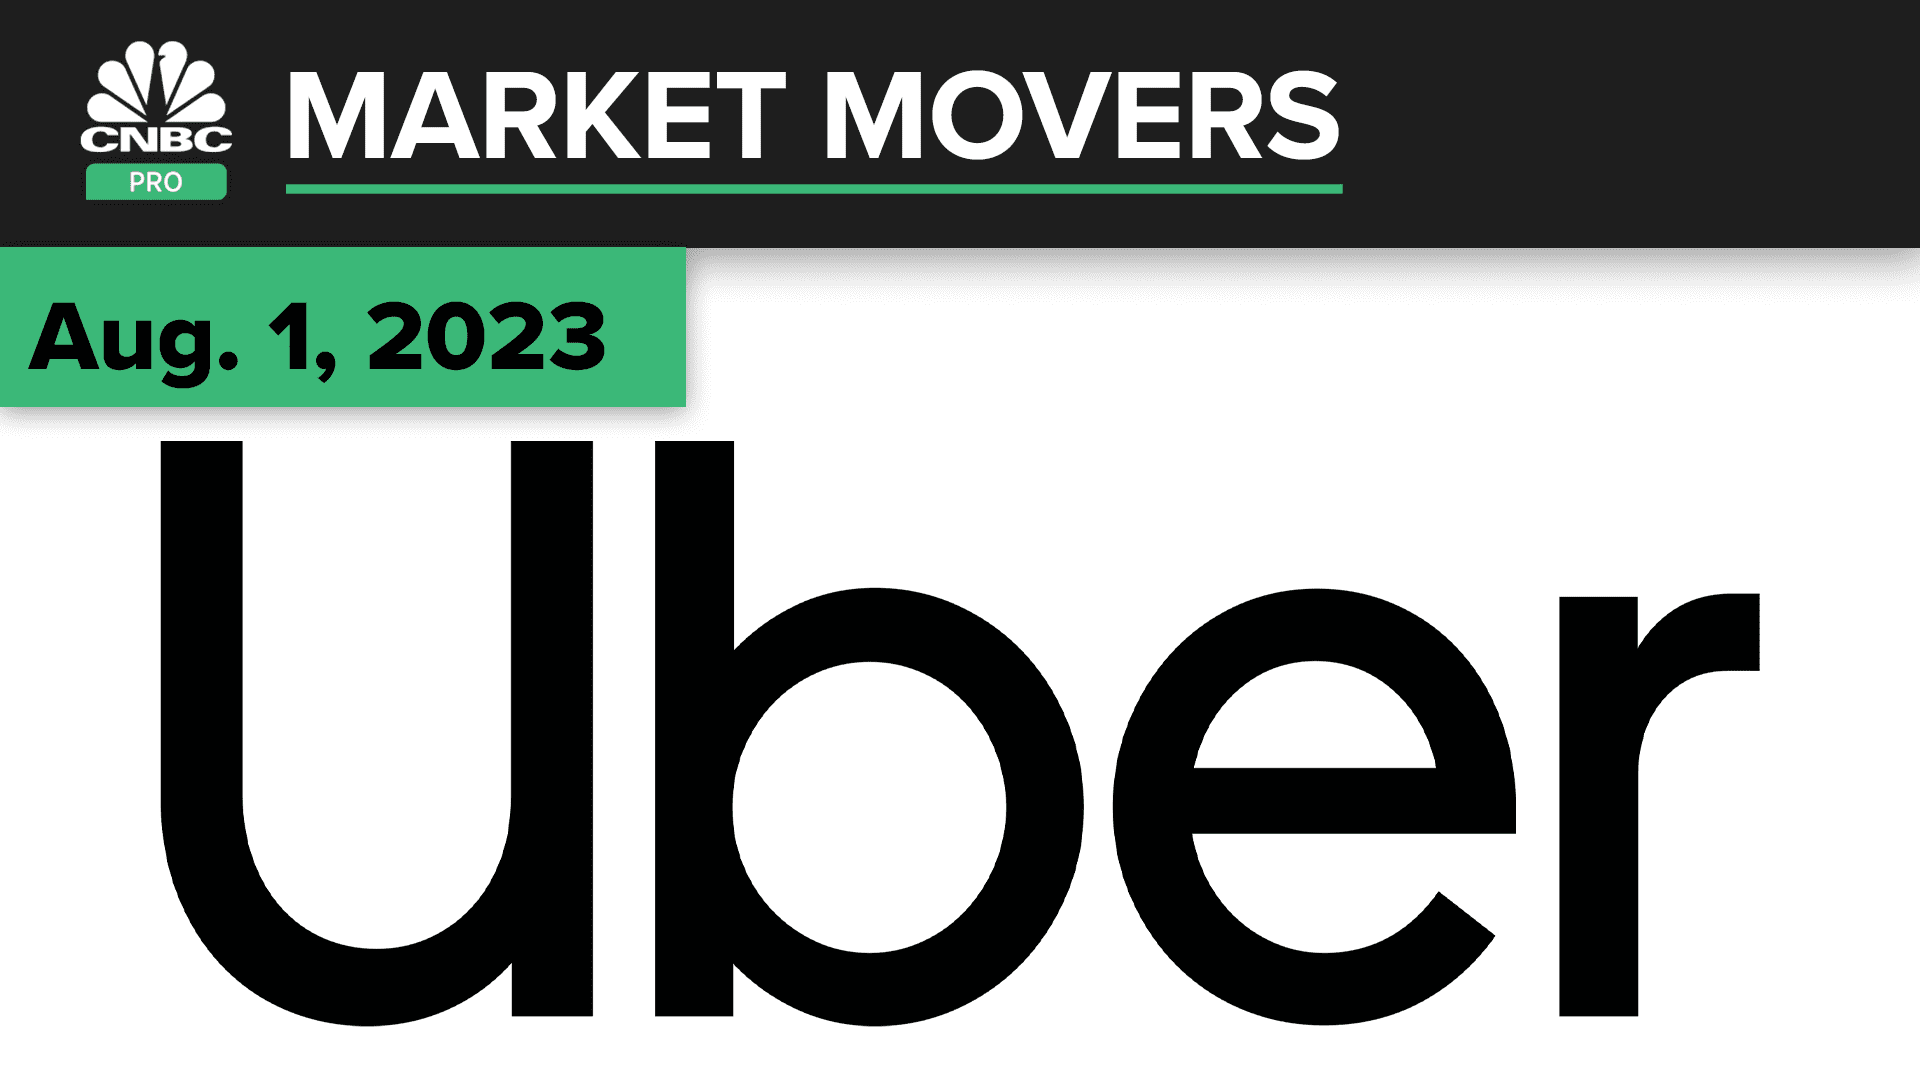 Uber shares dip after mixed second-quarter results. Here's what the pros are saying